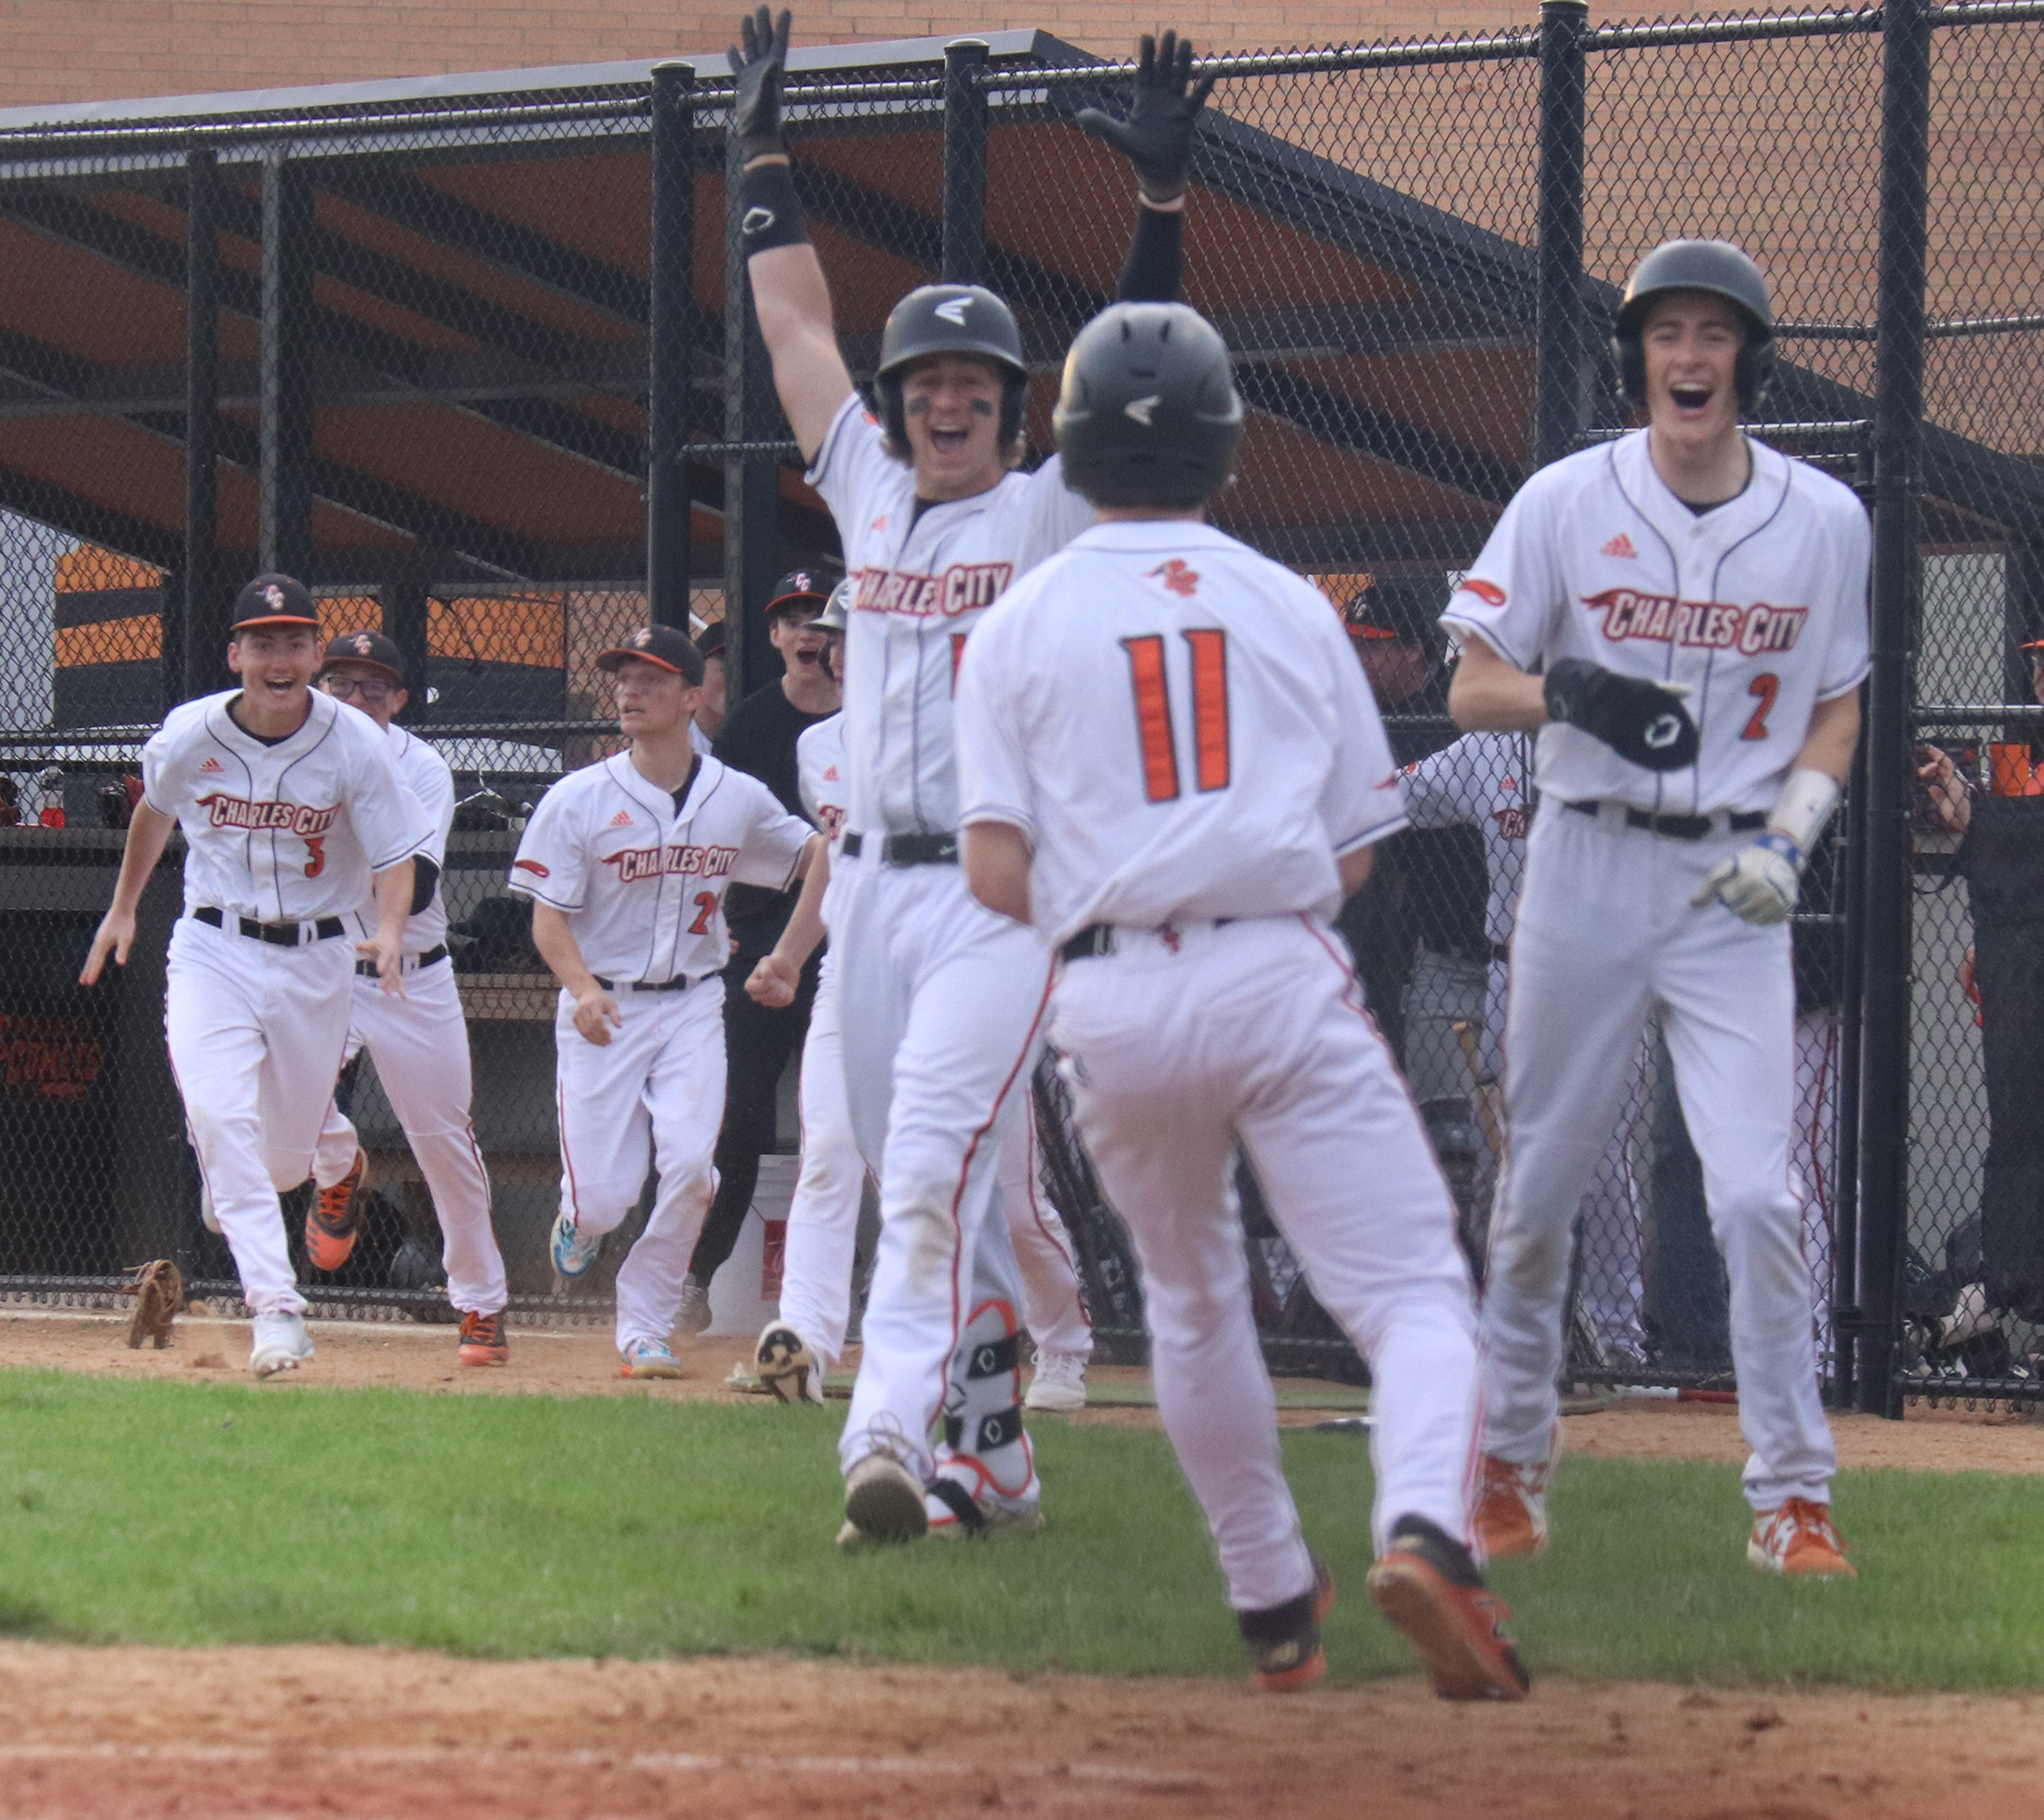 Bohlen’s walk-off double lifts Comets in 3-2 opening-day win over Bulldogs